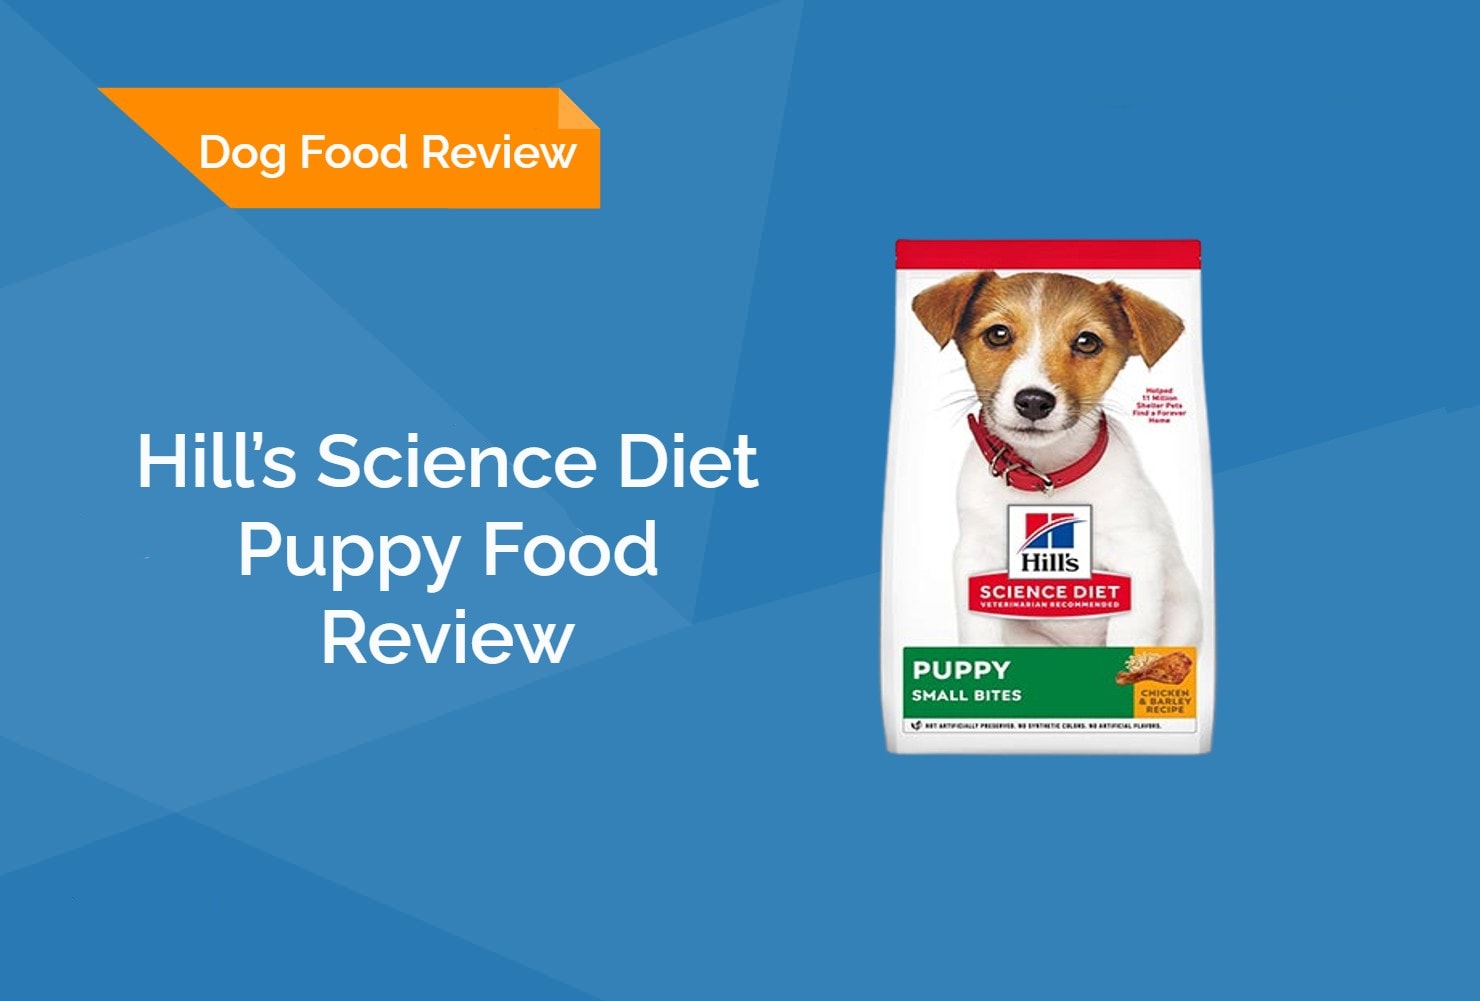 Hill’s Science Diet Puppy Food Review